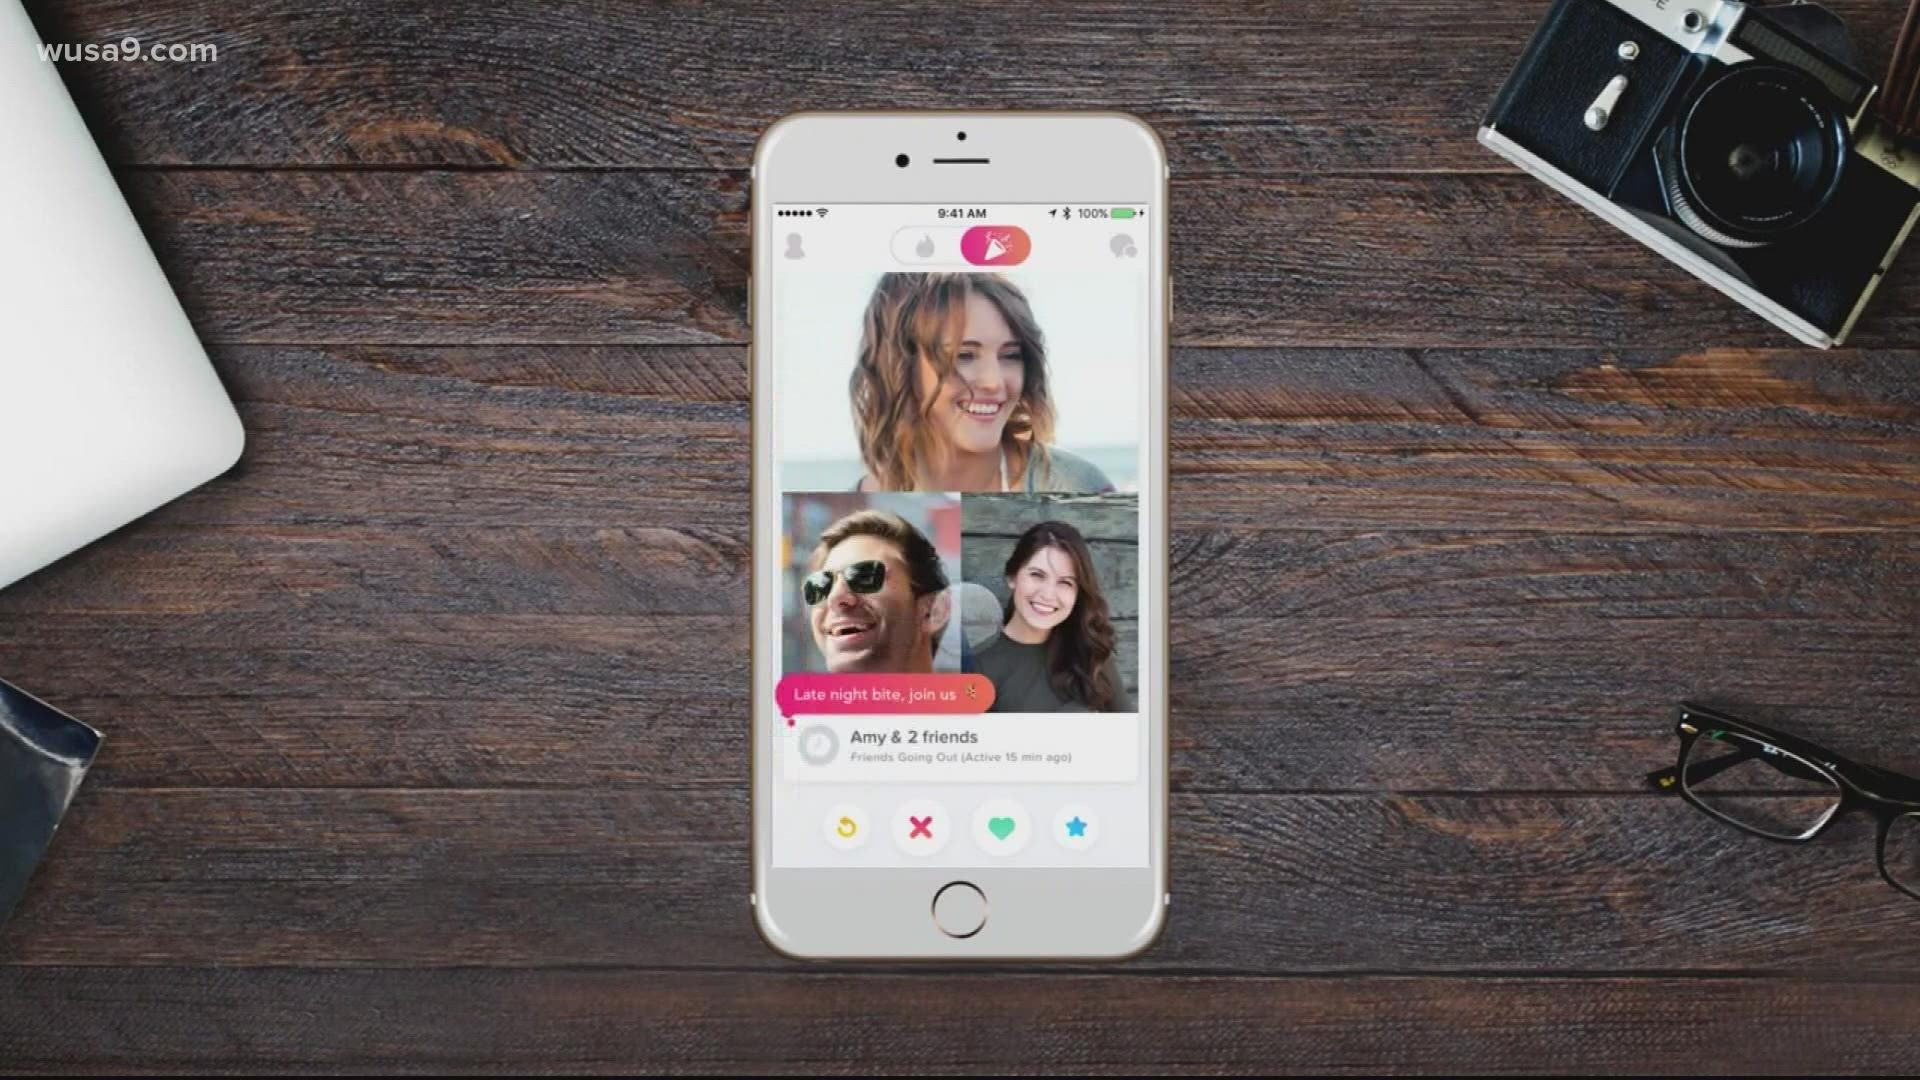 Tinder is looking out for the safety of users on its dating app before they agree to meet a match for a date. Users get 2 free background checks.